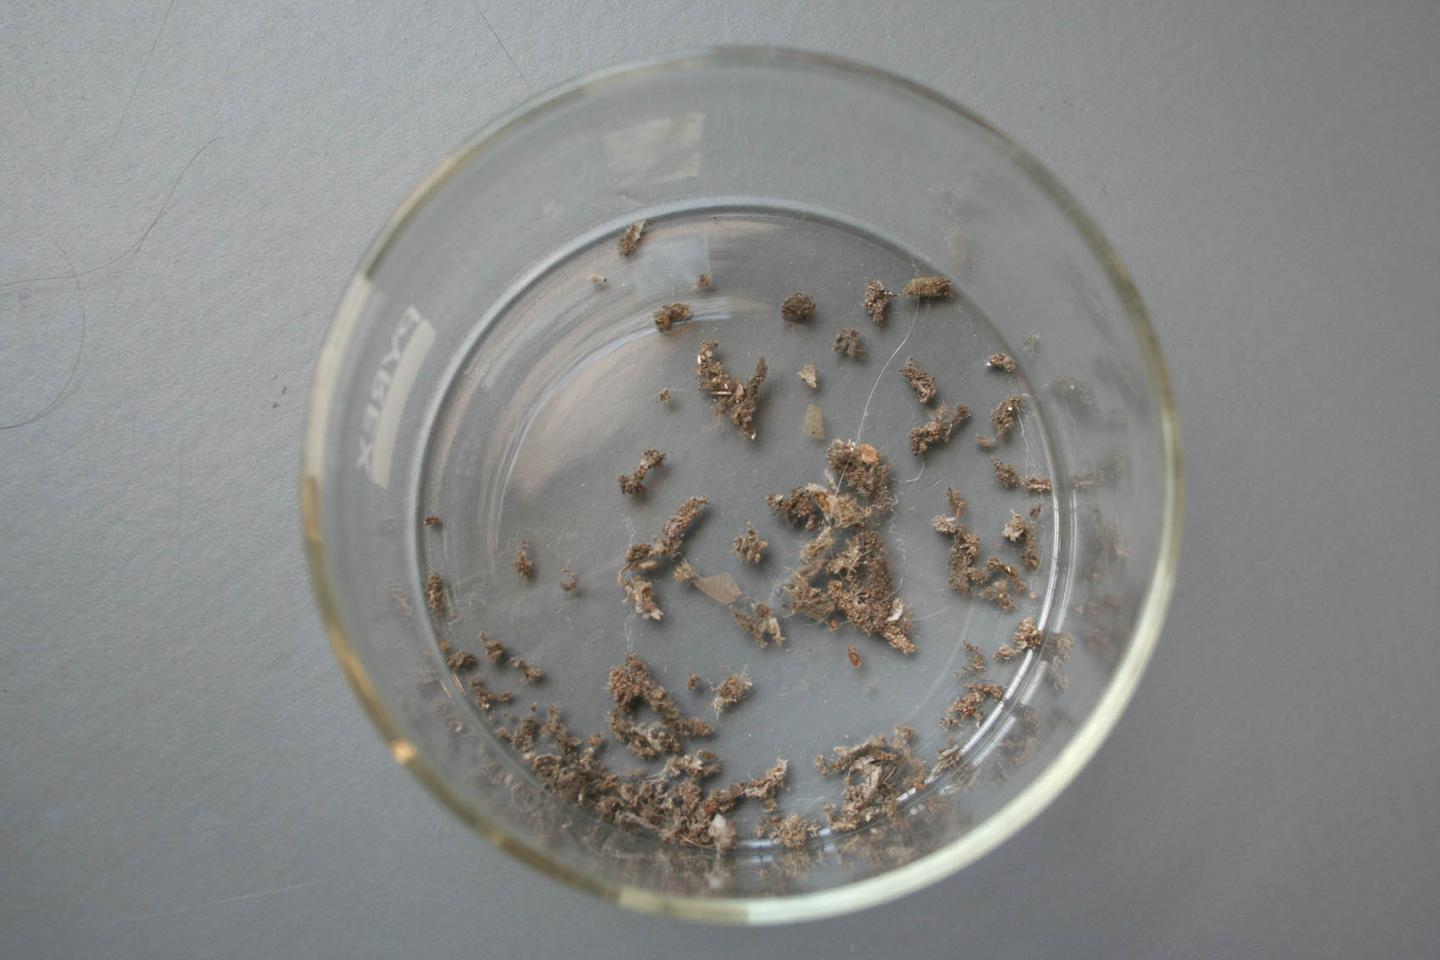 Moth remains removed during cleaning